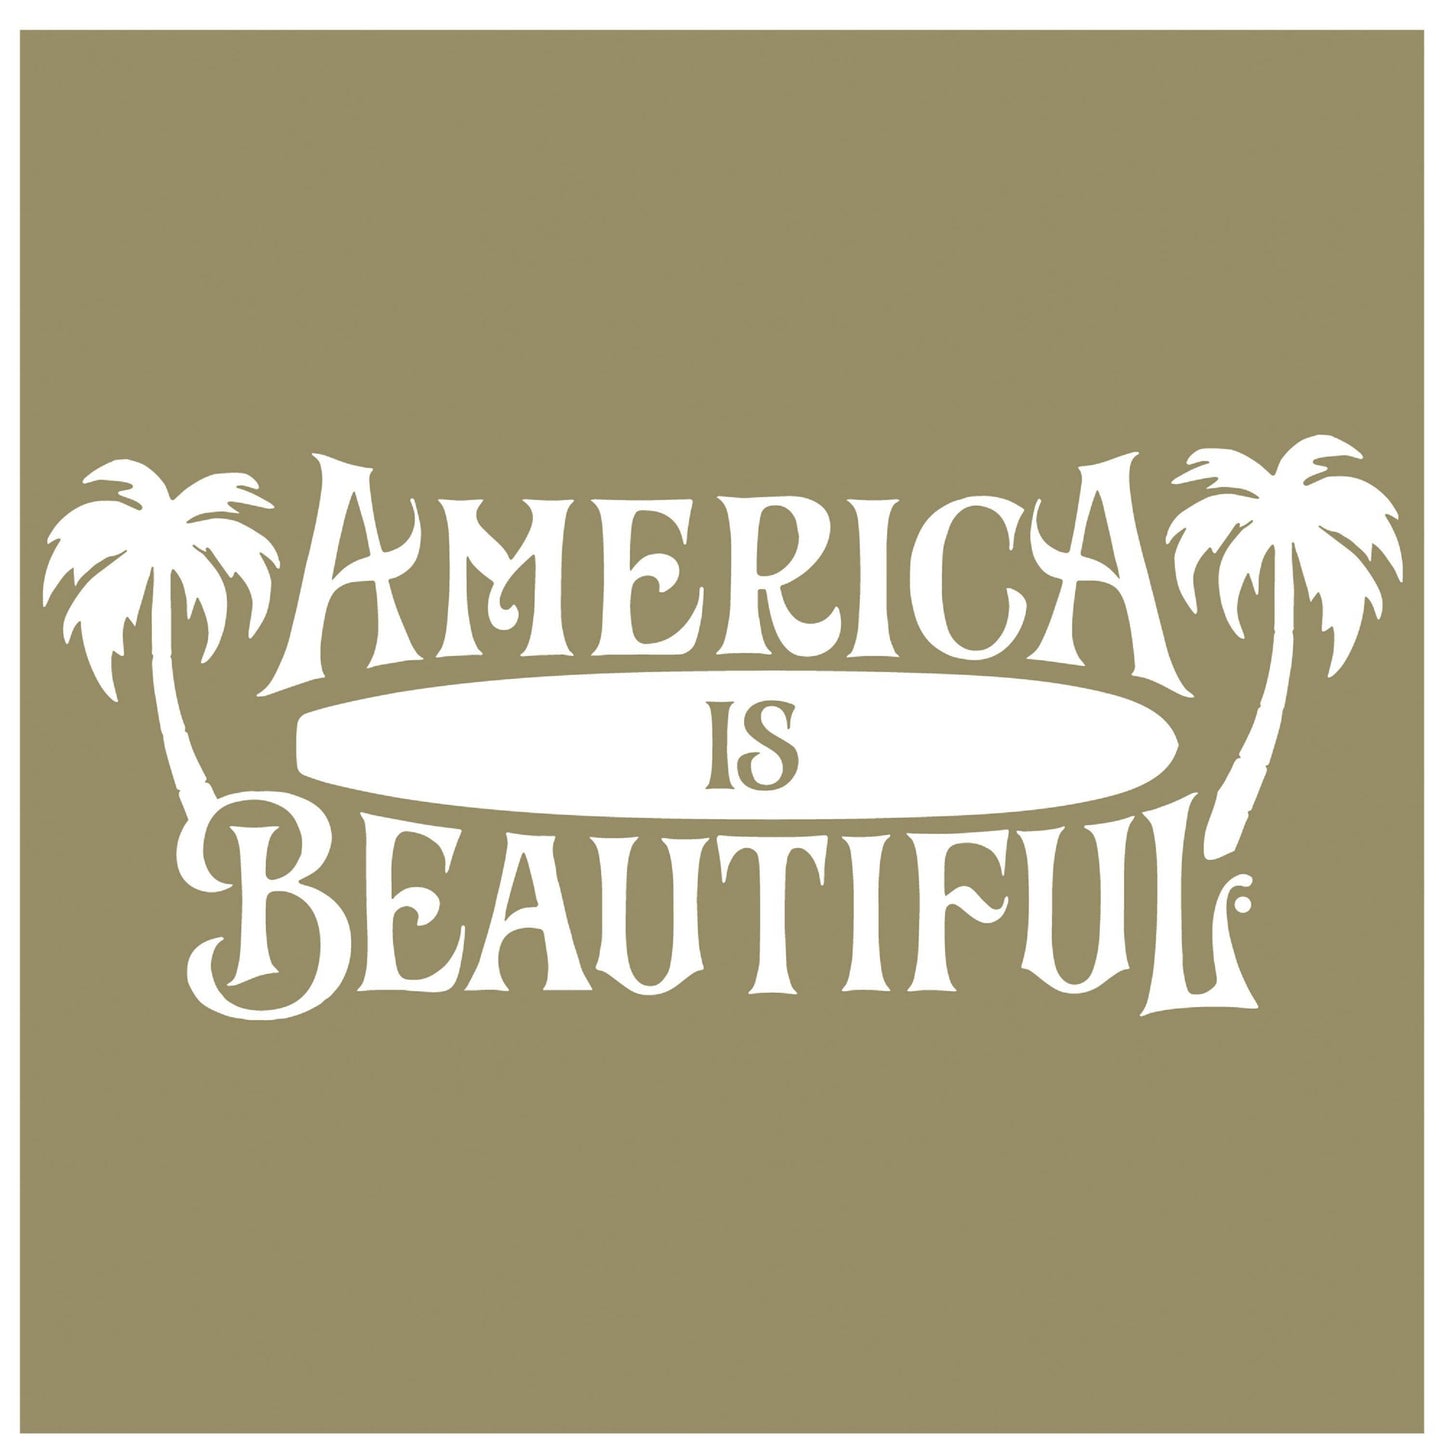 America Is Beautiful® Surfboard and Palm Trees Beach Die Cut White Vinyl Sticker Decal